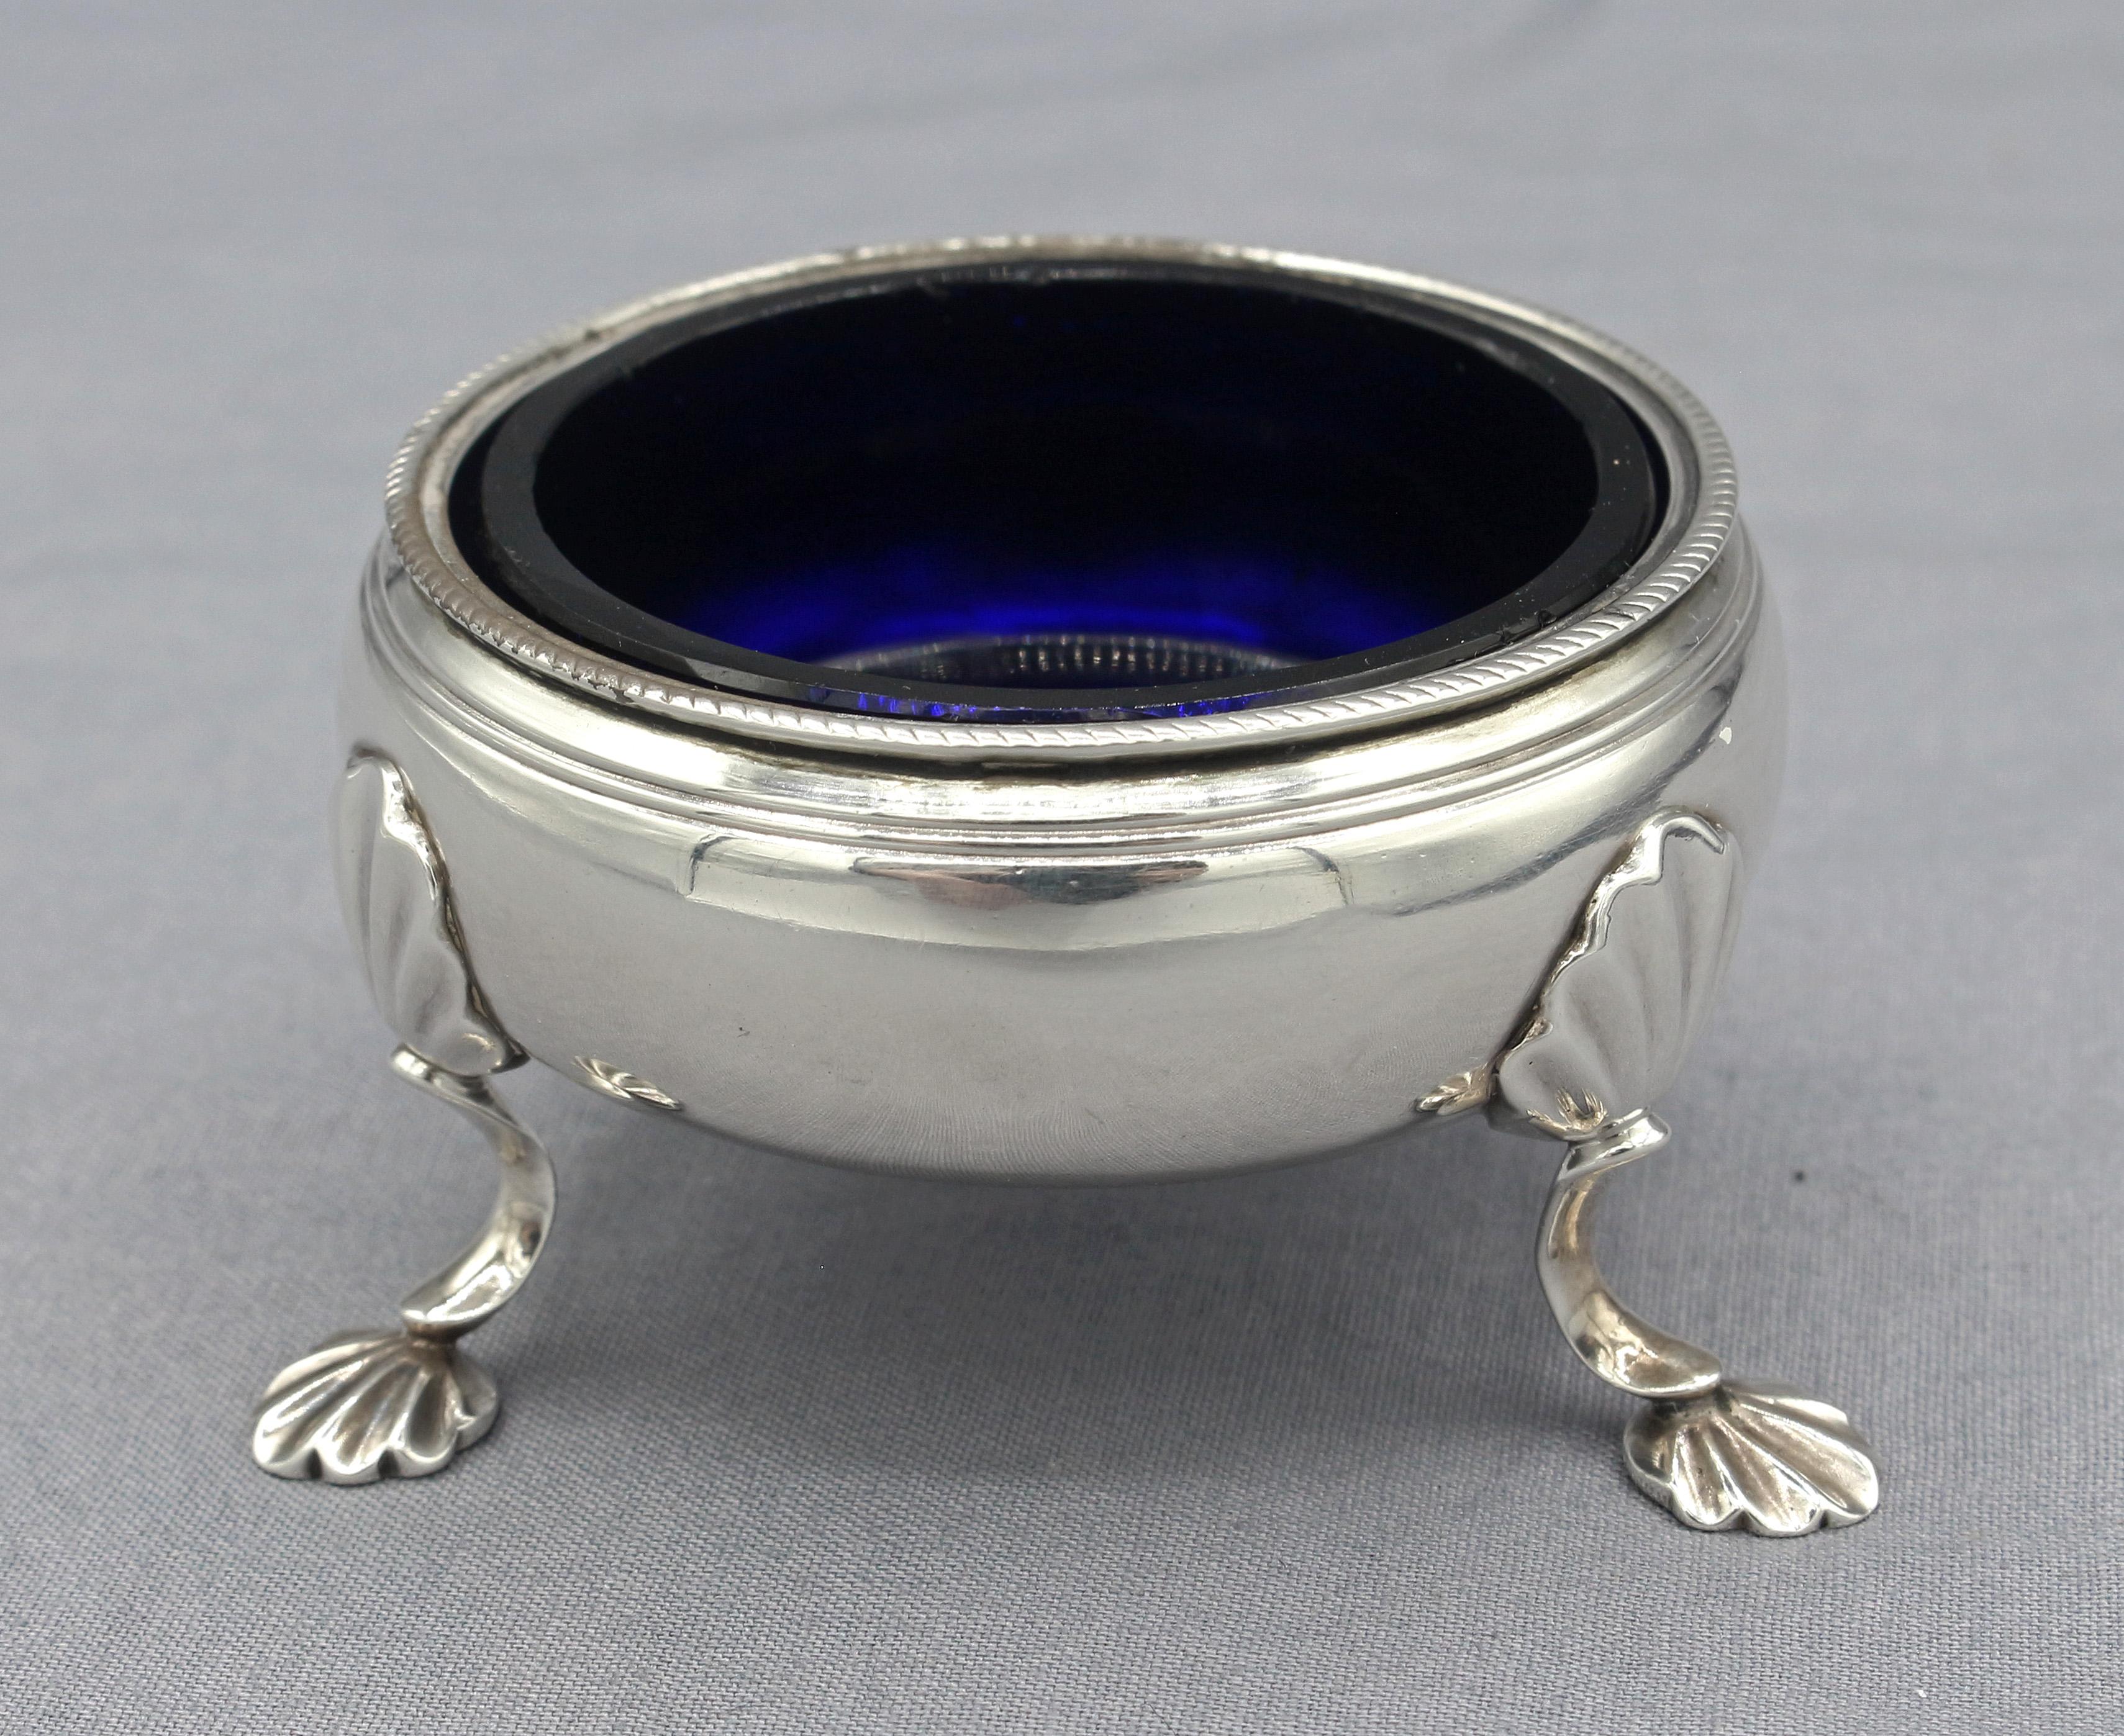 Sterling silver master salt with later cobalt liner, London, 1759. George II period. Raised on 3 shaped legs surmounted by shells & ending in shell feet. Probably by William Bagnall (mark partially erased). 1.35 troy oz.
2 3/8